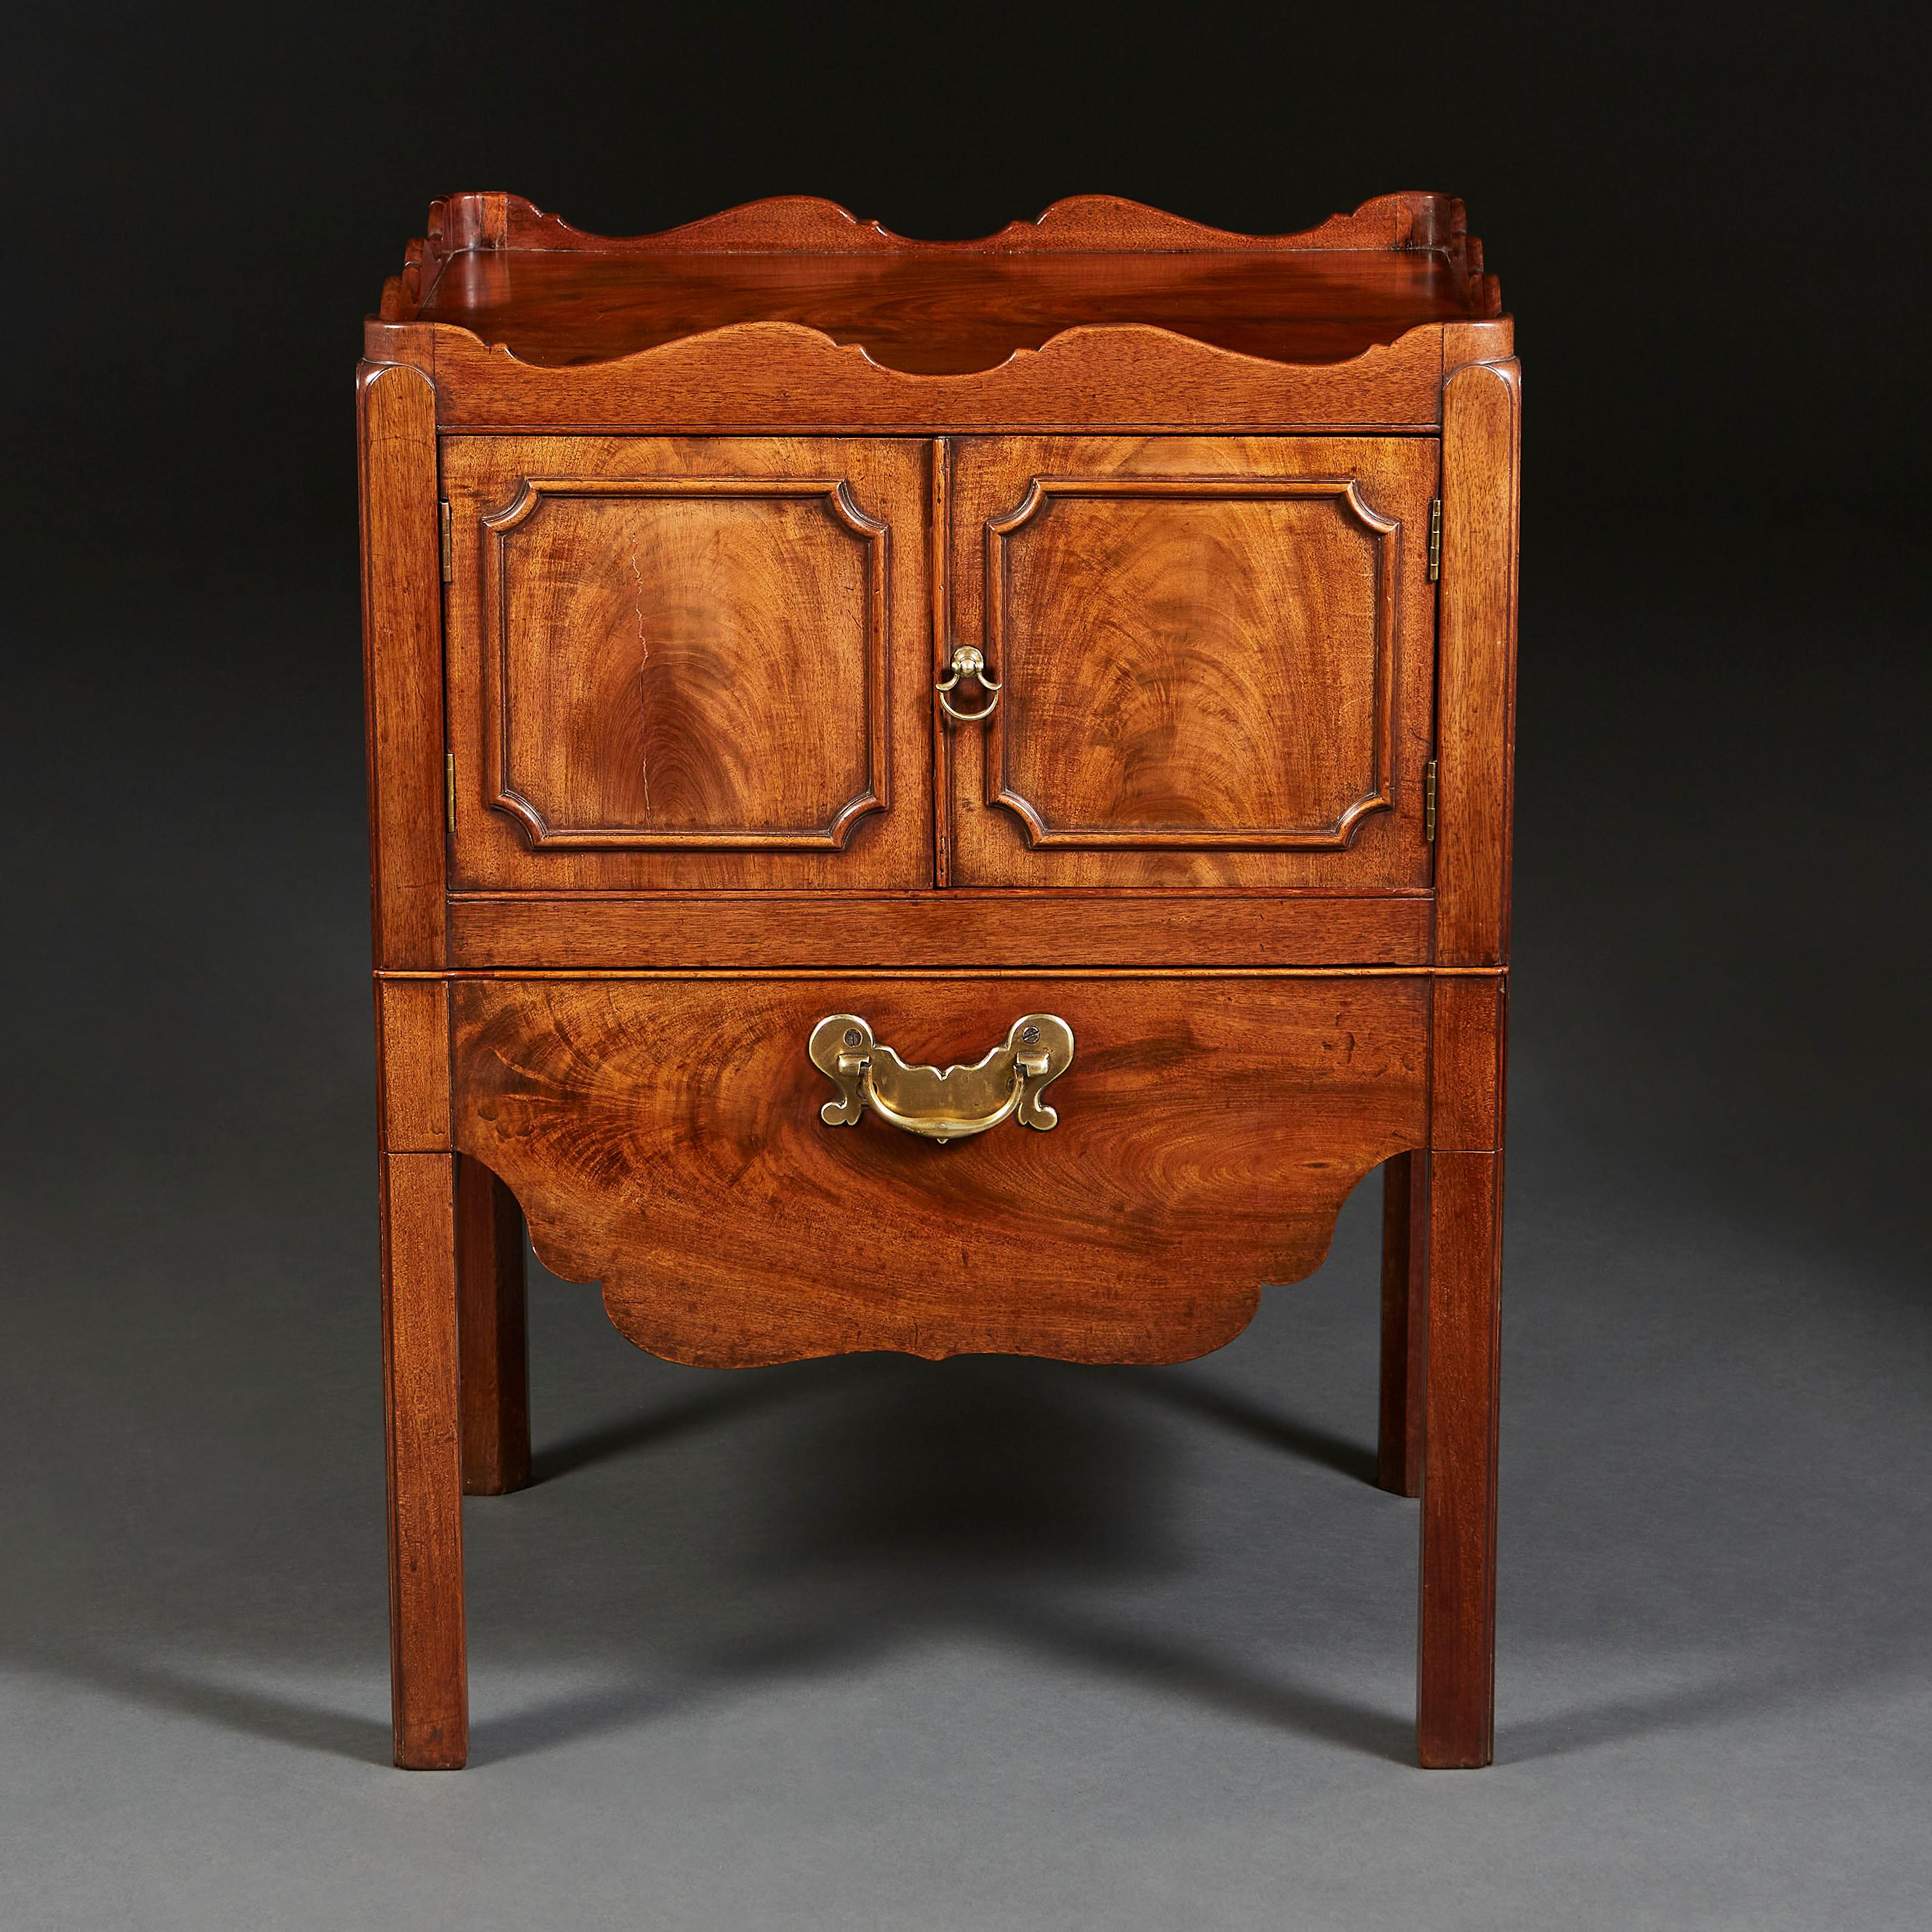 English Georgian Flame Mahogany Wood Bedside Cabinet with Brass Handles